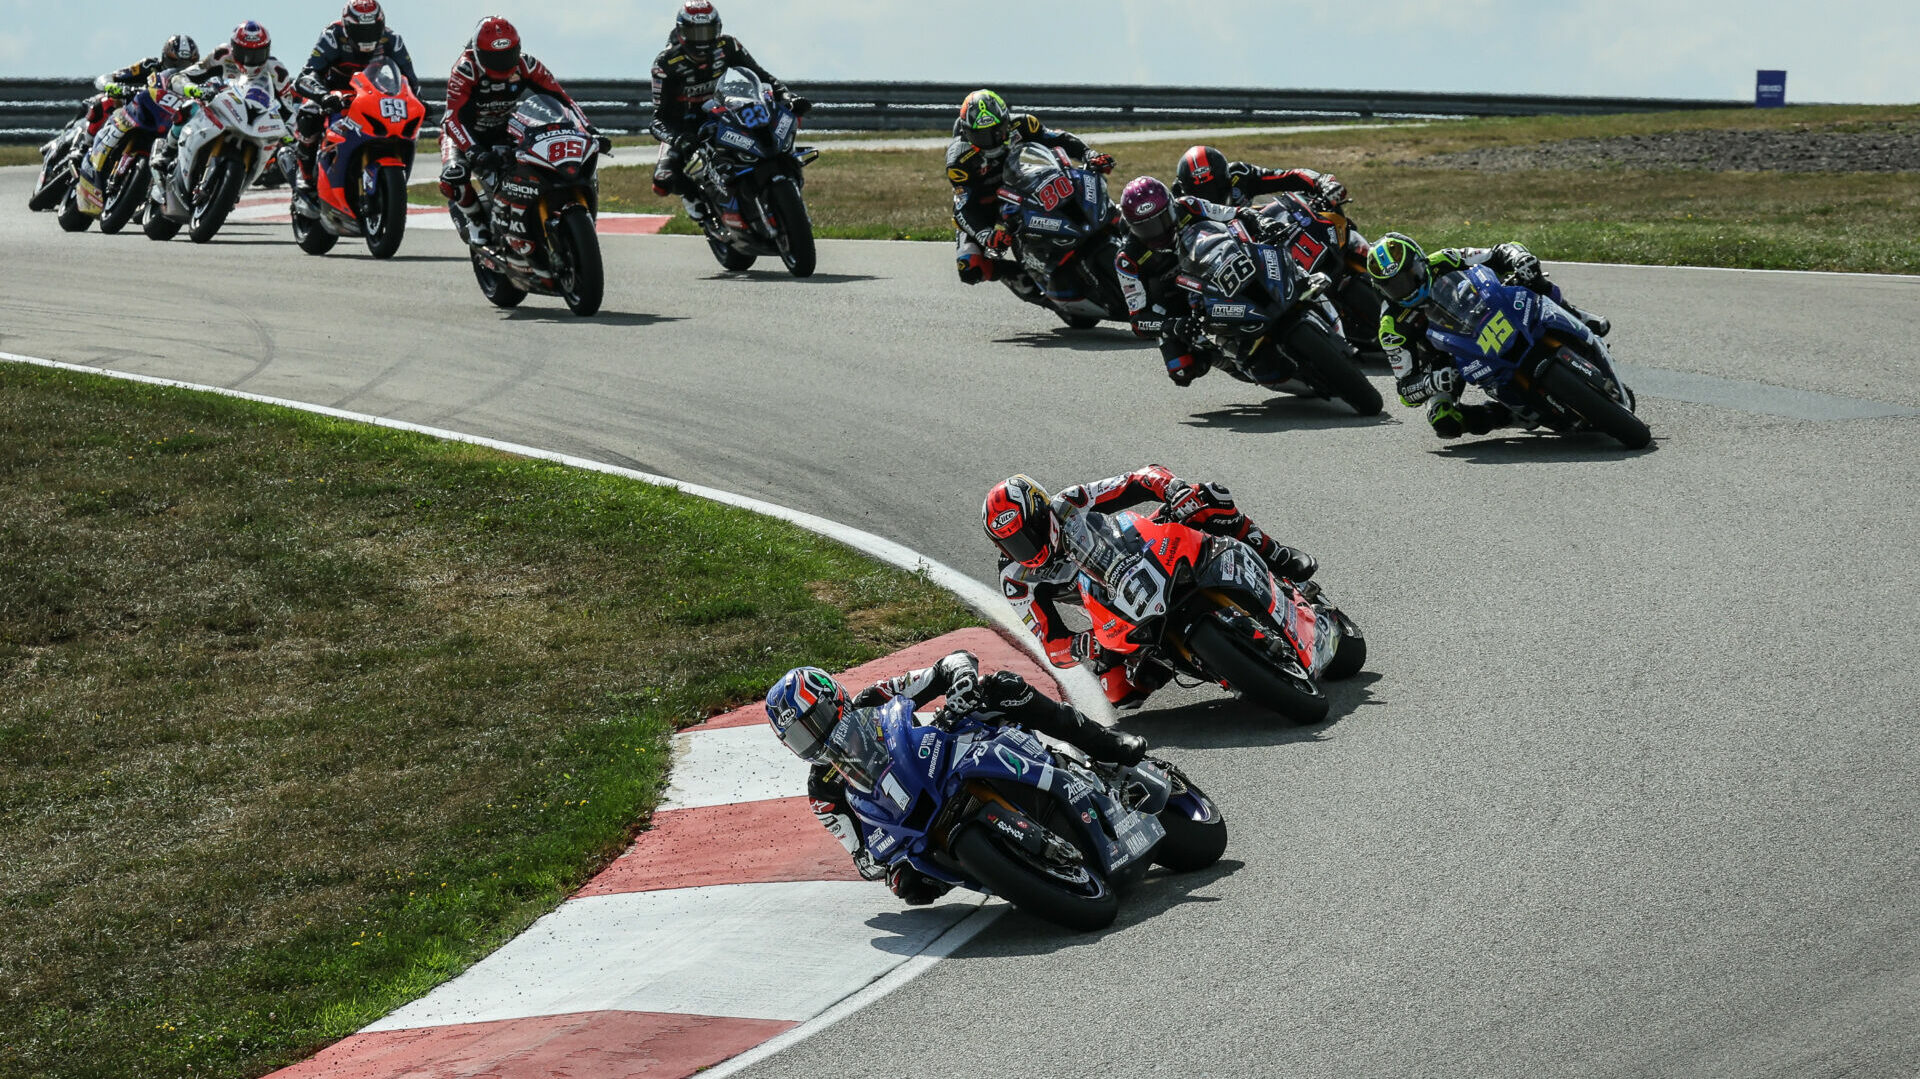 Jake Gagne (1) leads Danilo Petrucci (9) early in one of the three starts during MotoAmerica Superbike Race One Saturday at PittRace. Photo by Brian J. Nelson, courtesy MotoAmerica.